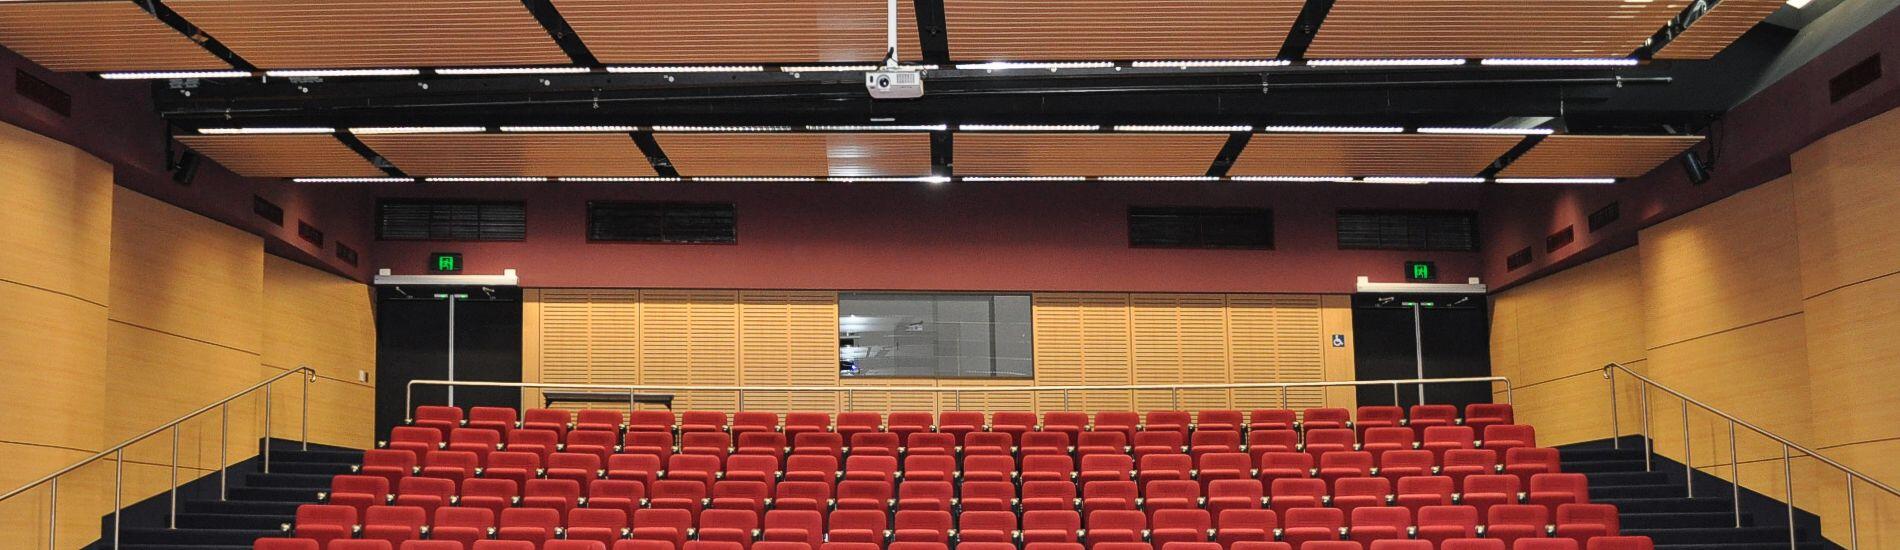 Mixed and matched slats and panel product address acoustics and aesthetics in school theatres